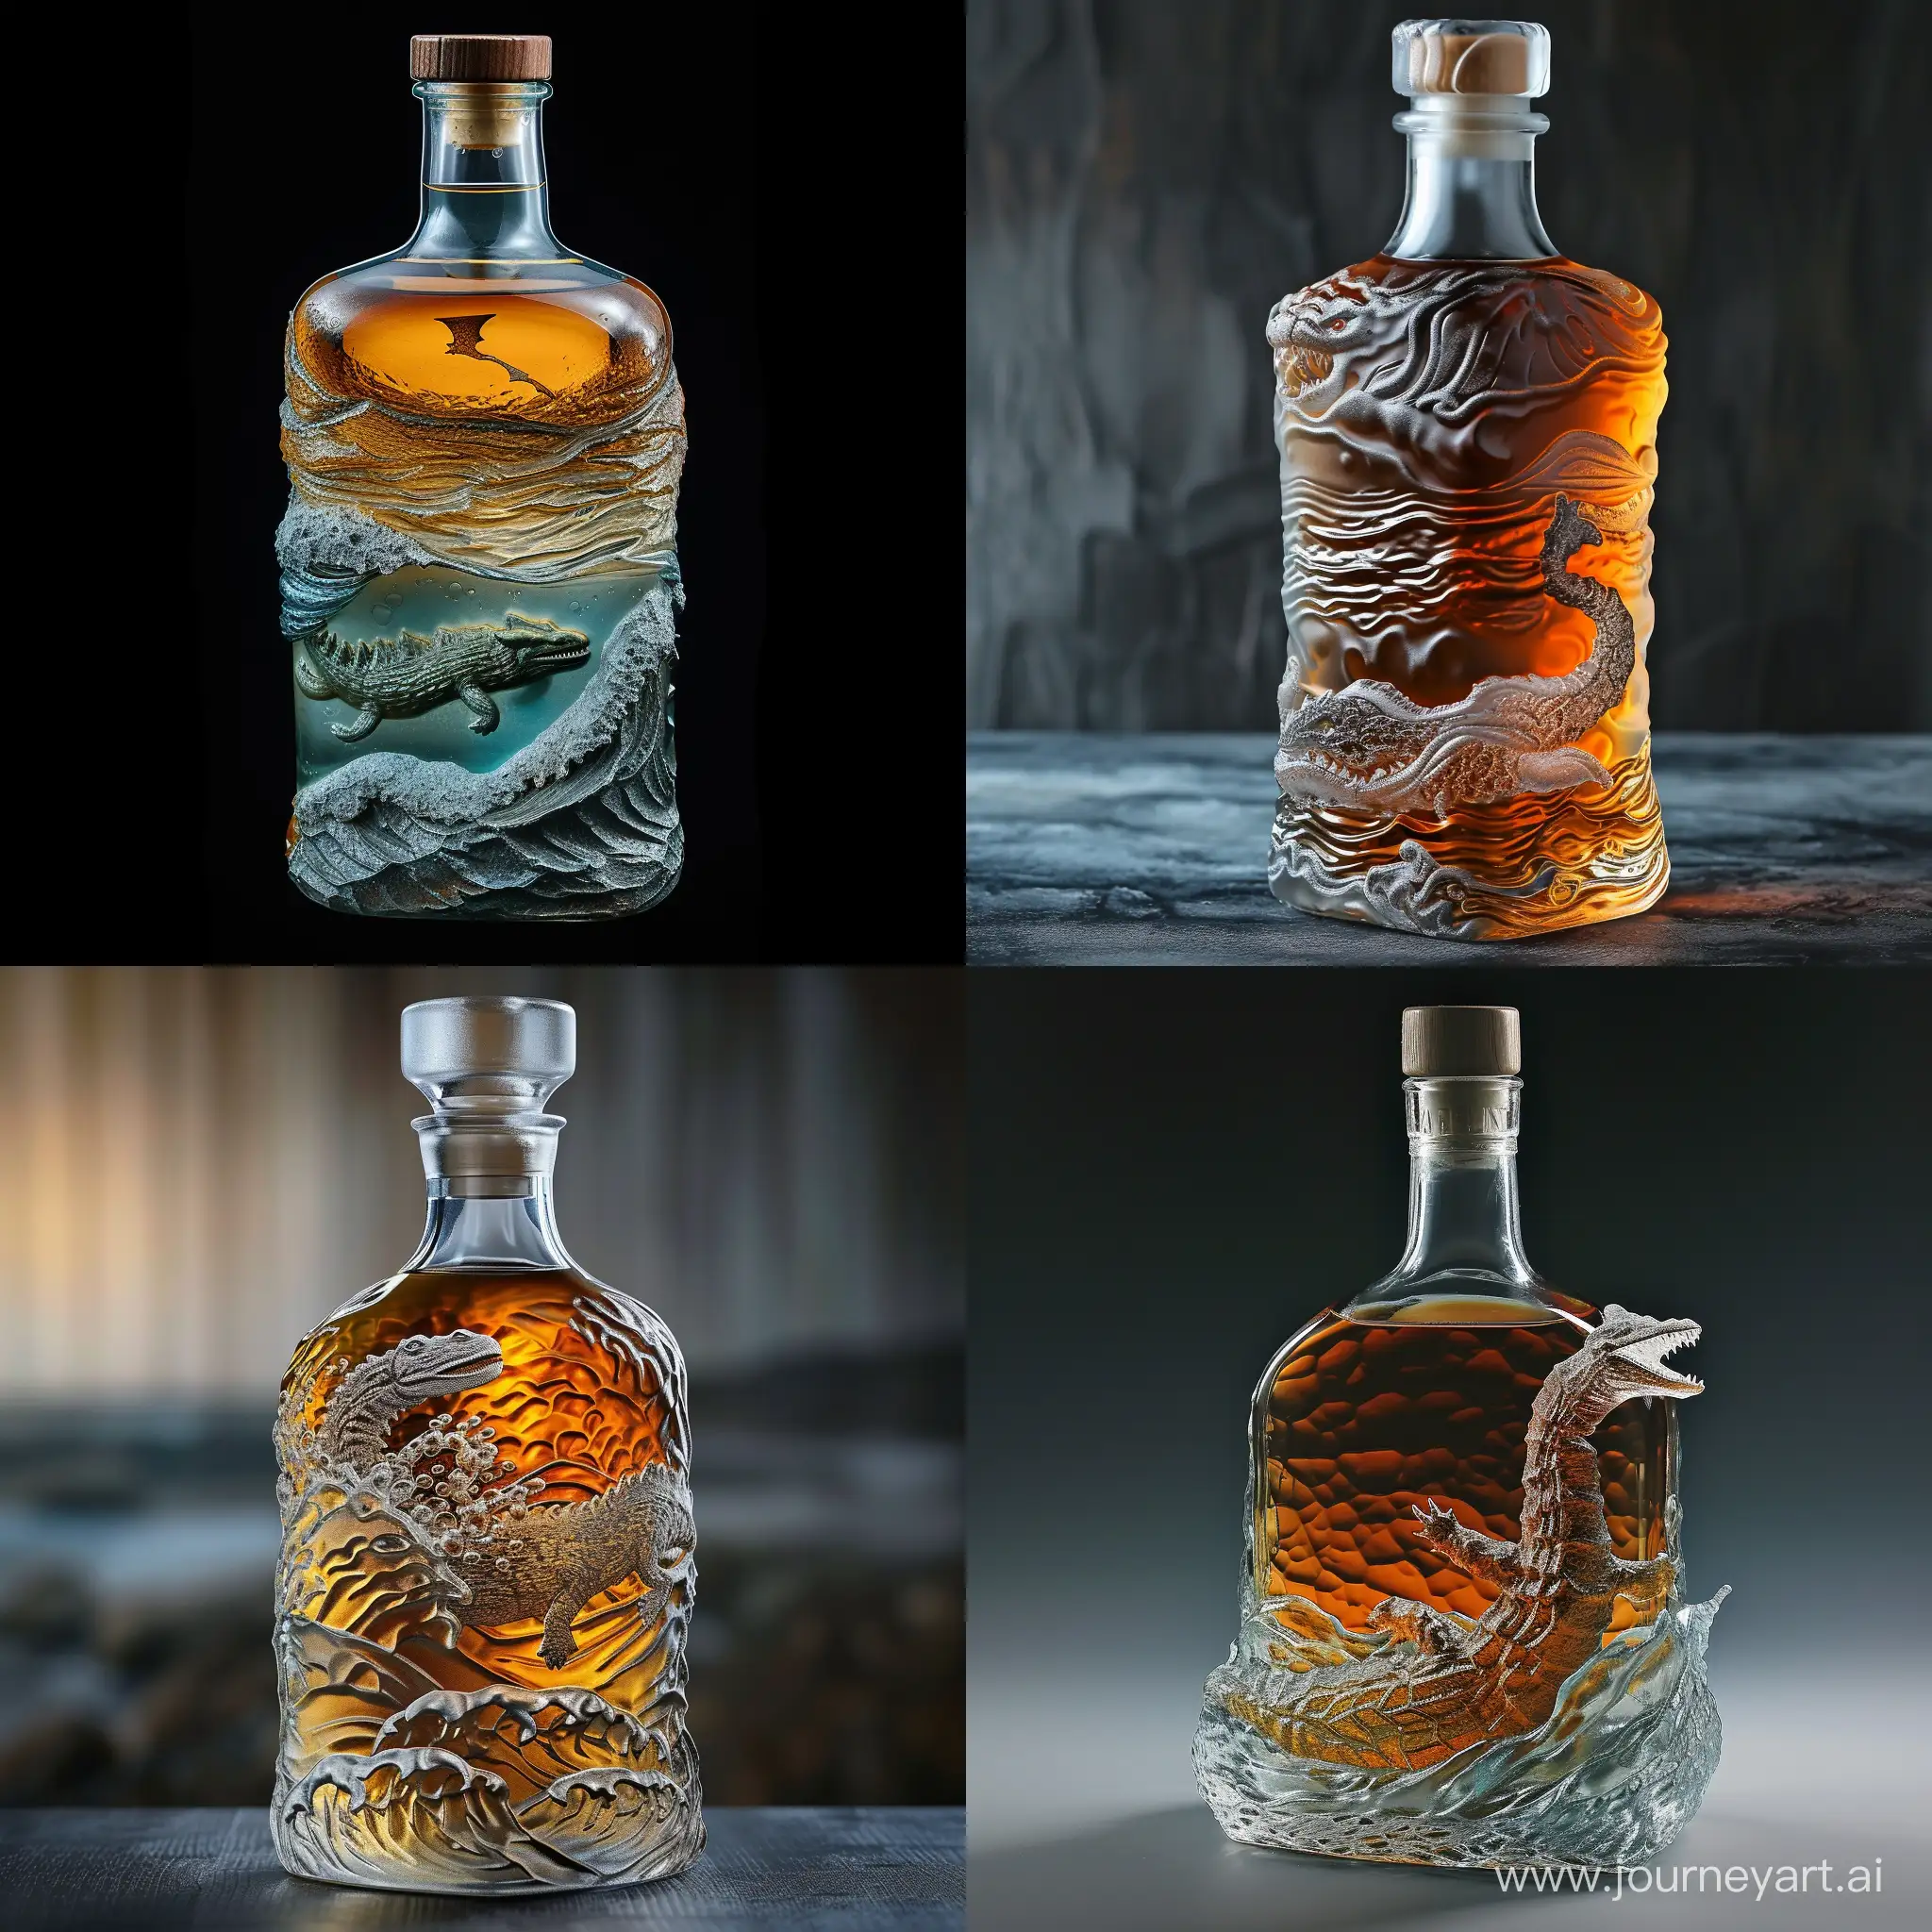 a textured whiskey bottle with the loch ness monster swimming in waves textured glass